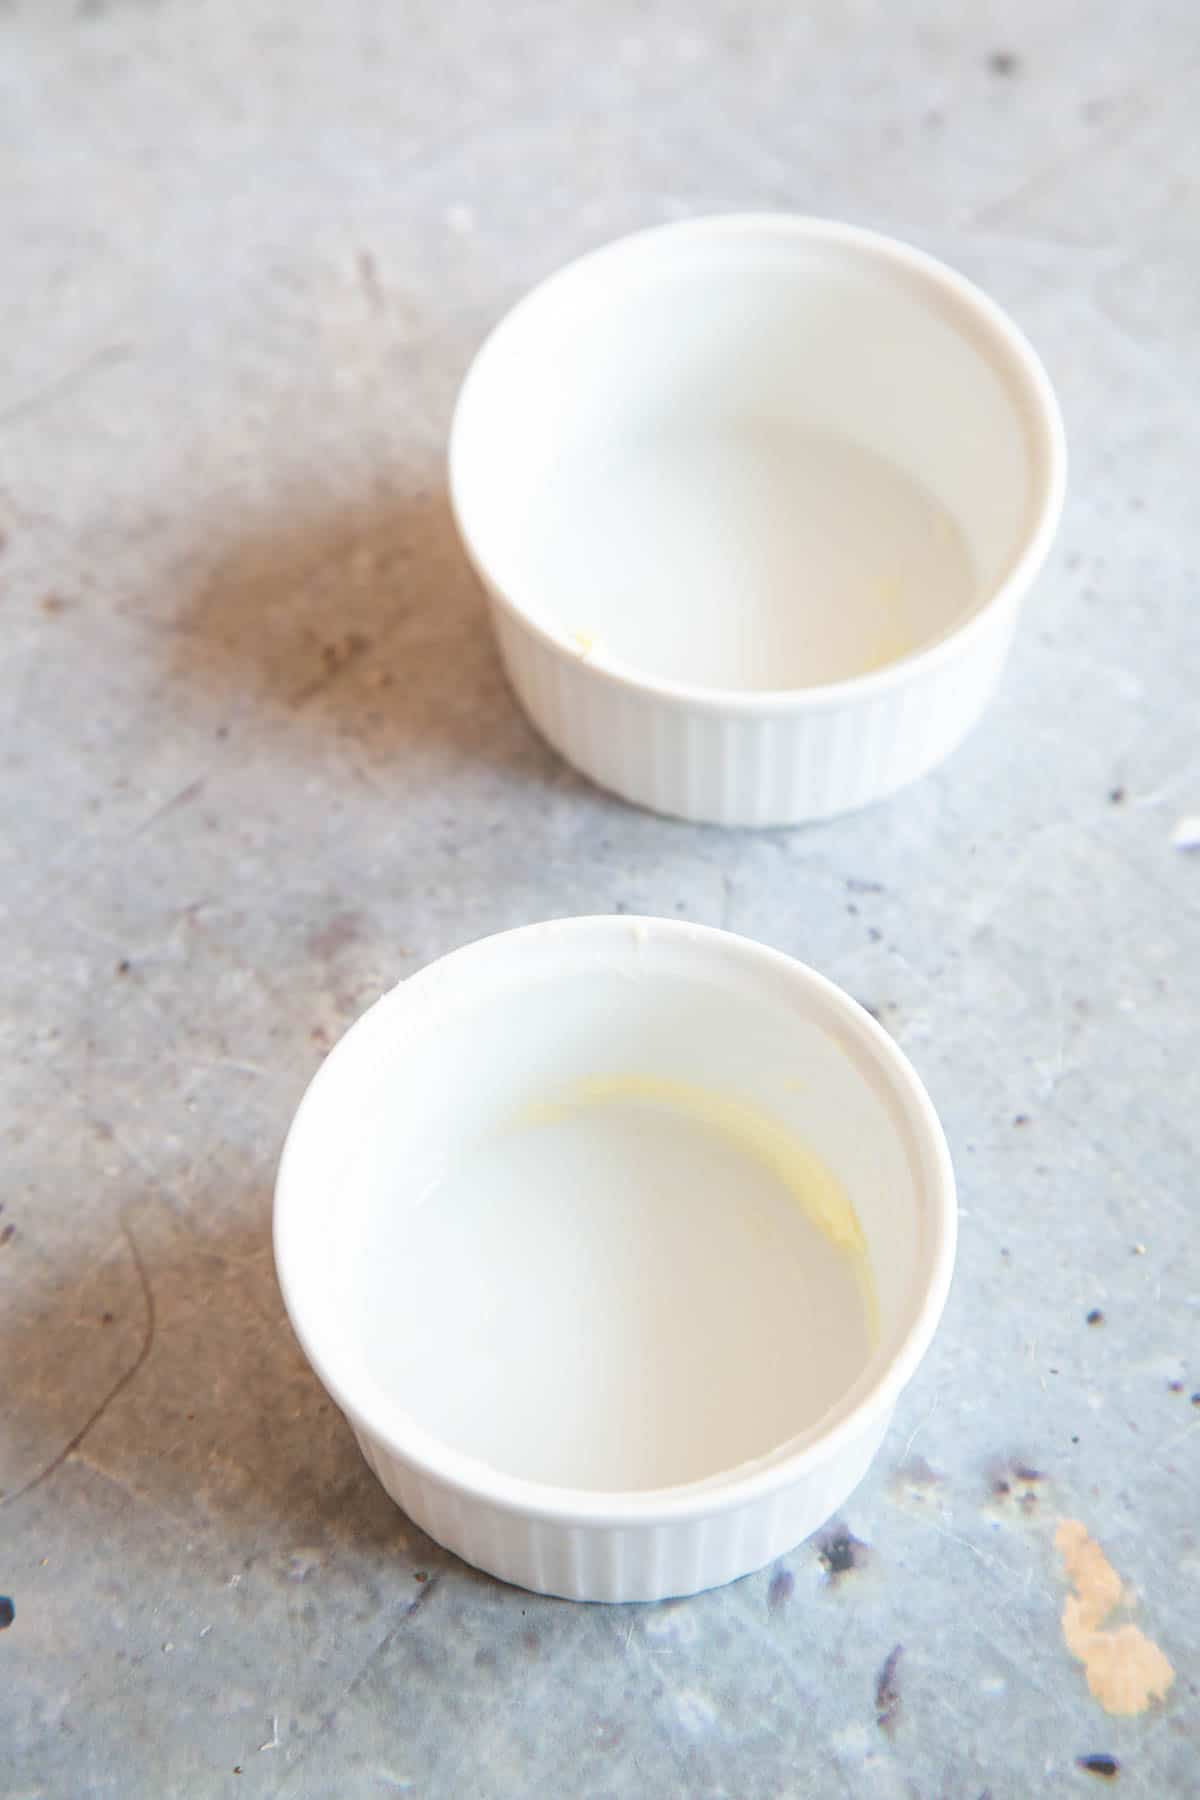 The inside of the ramekin dishes is greased with a little butter, ready to use.